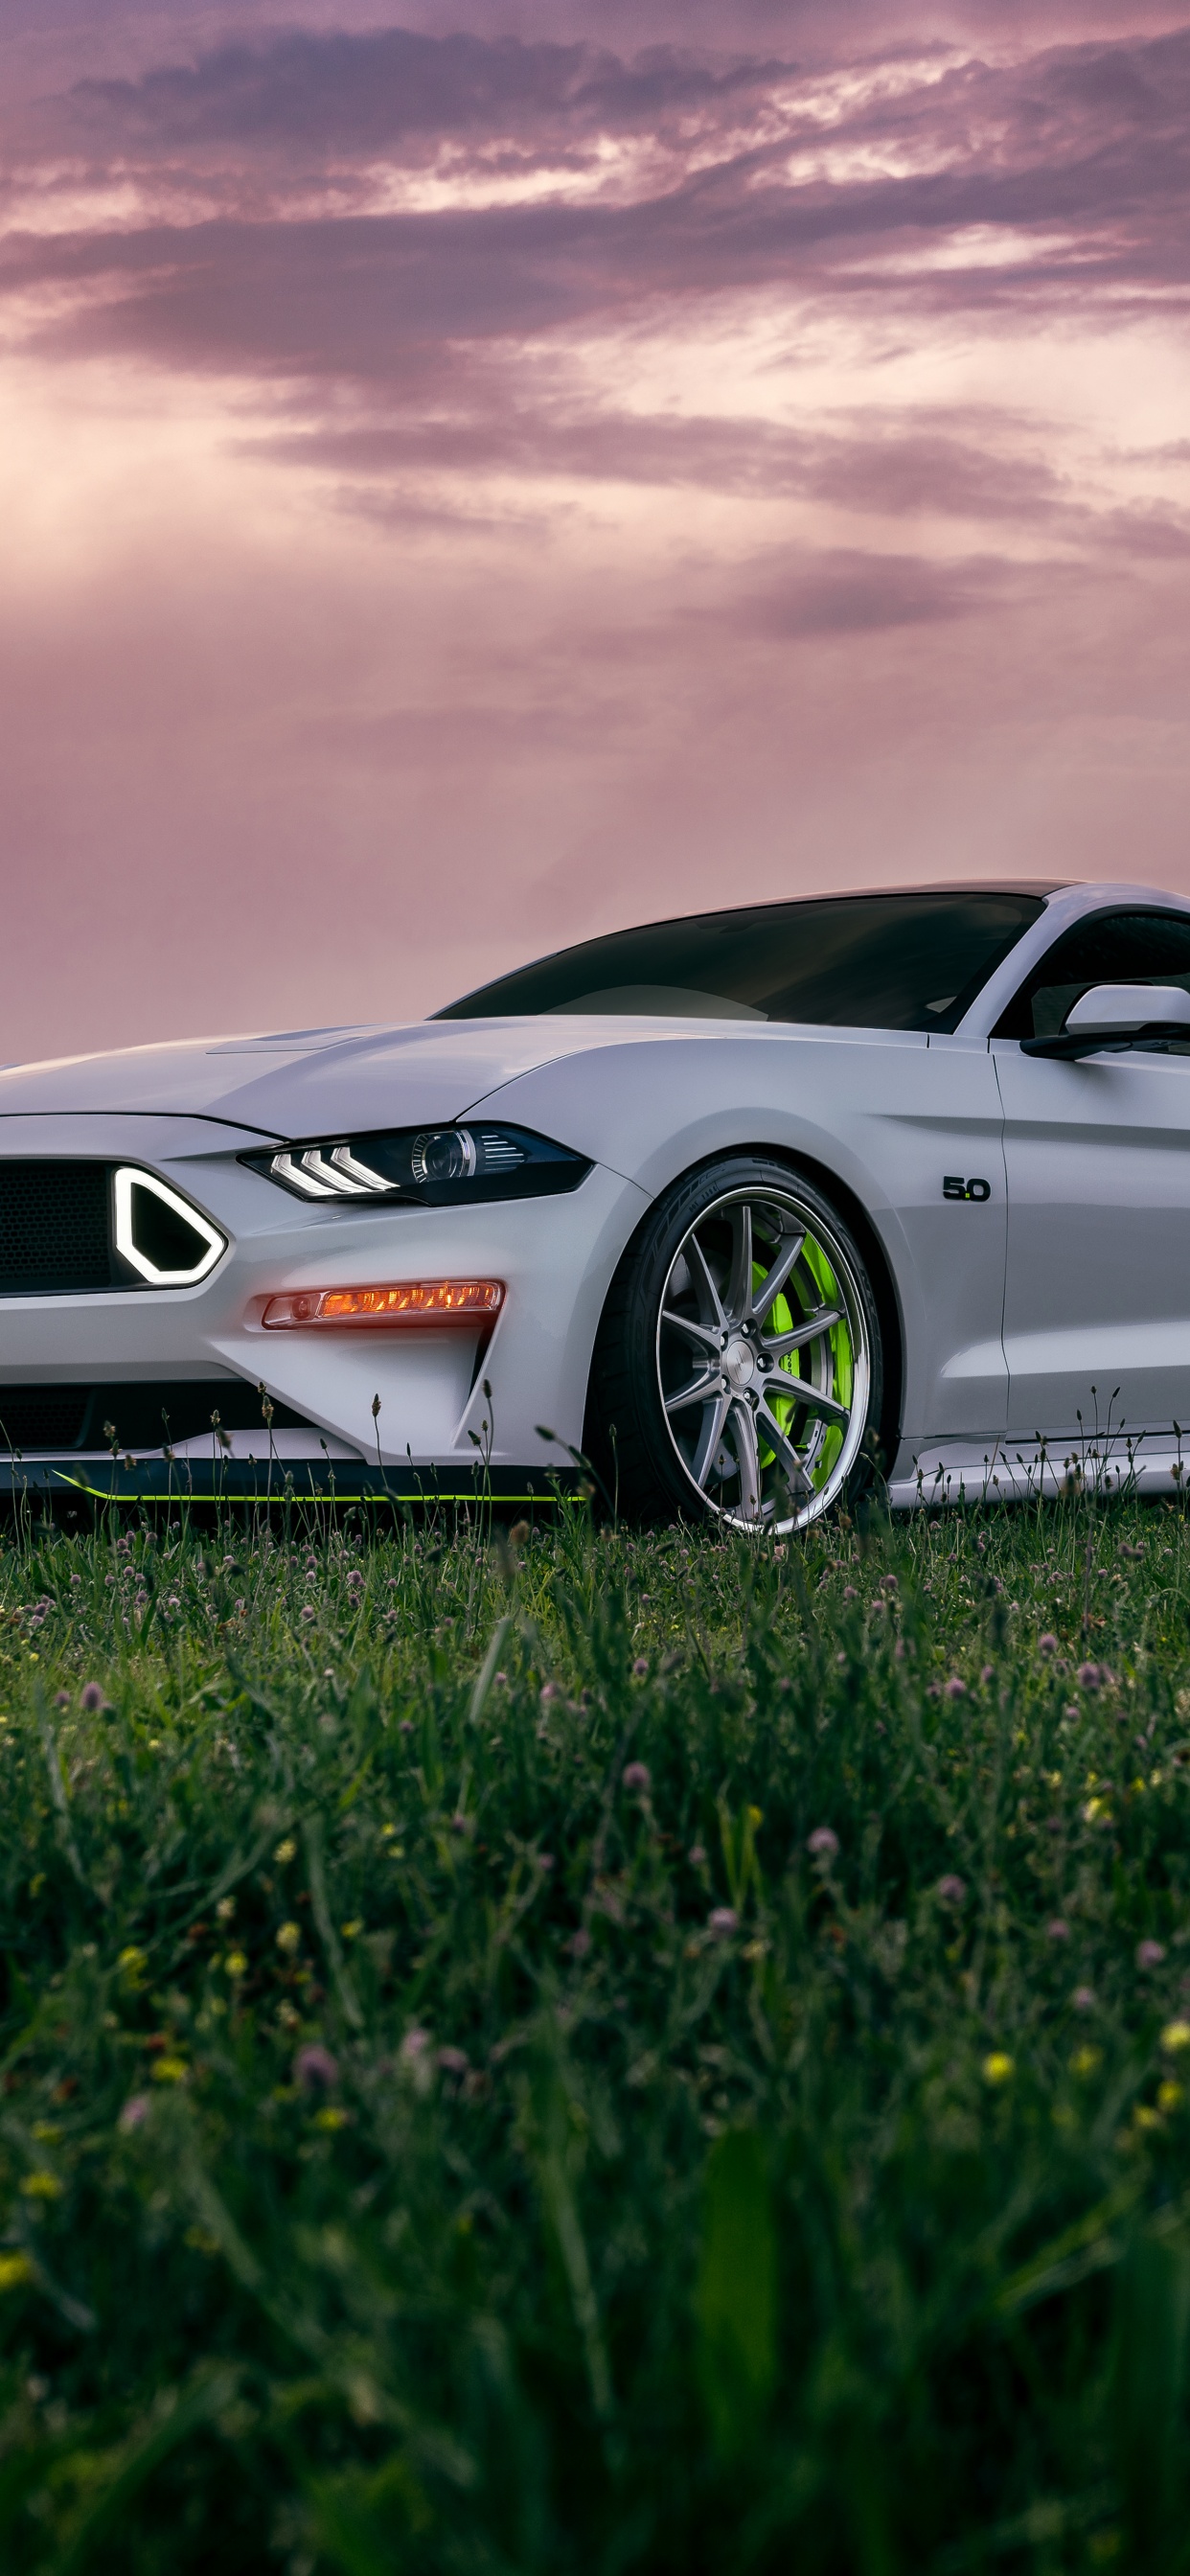 Everything You Need To Know About The Evil Ford Mustang Dark Horse -  ZigWheels